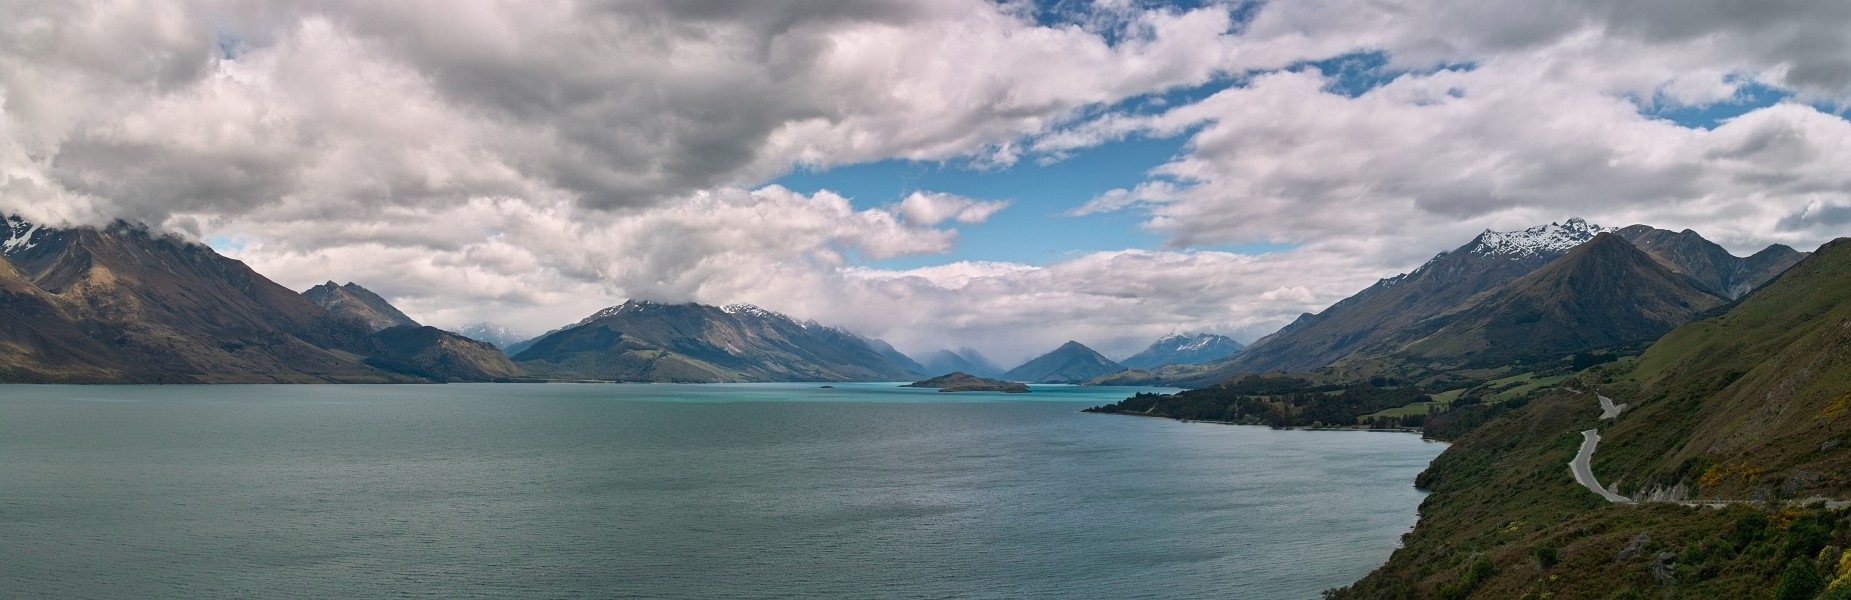 Lake Wakatipu from the Glenorchy-Queenstown Road